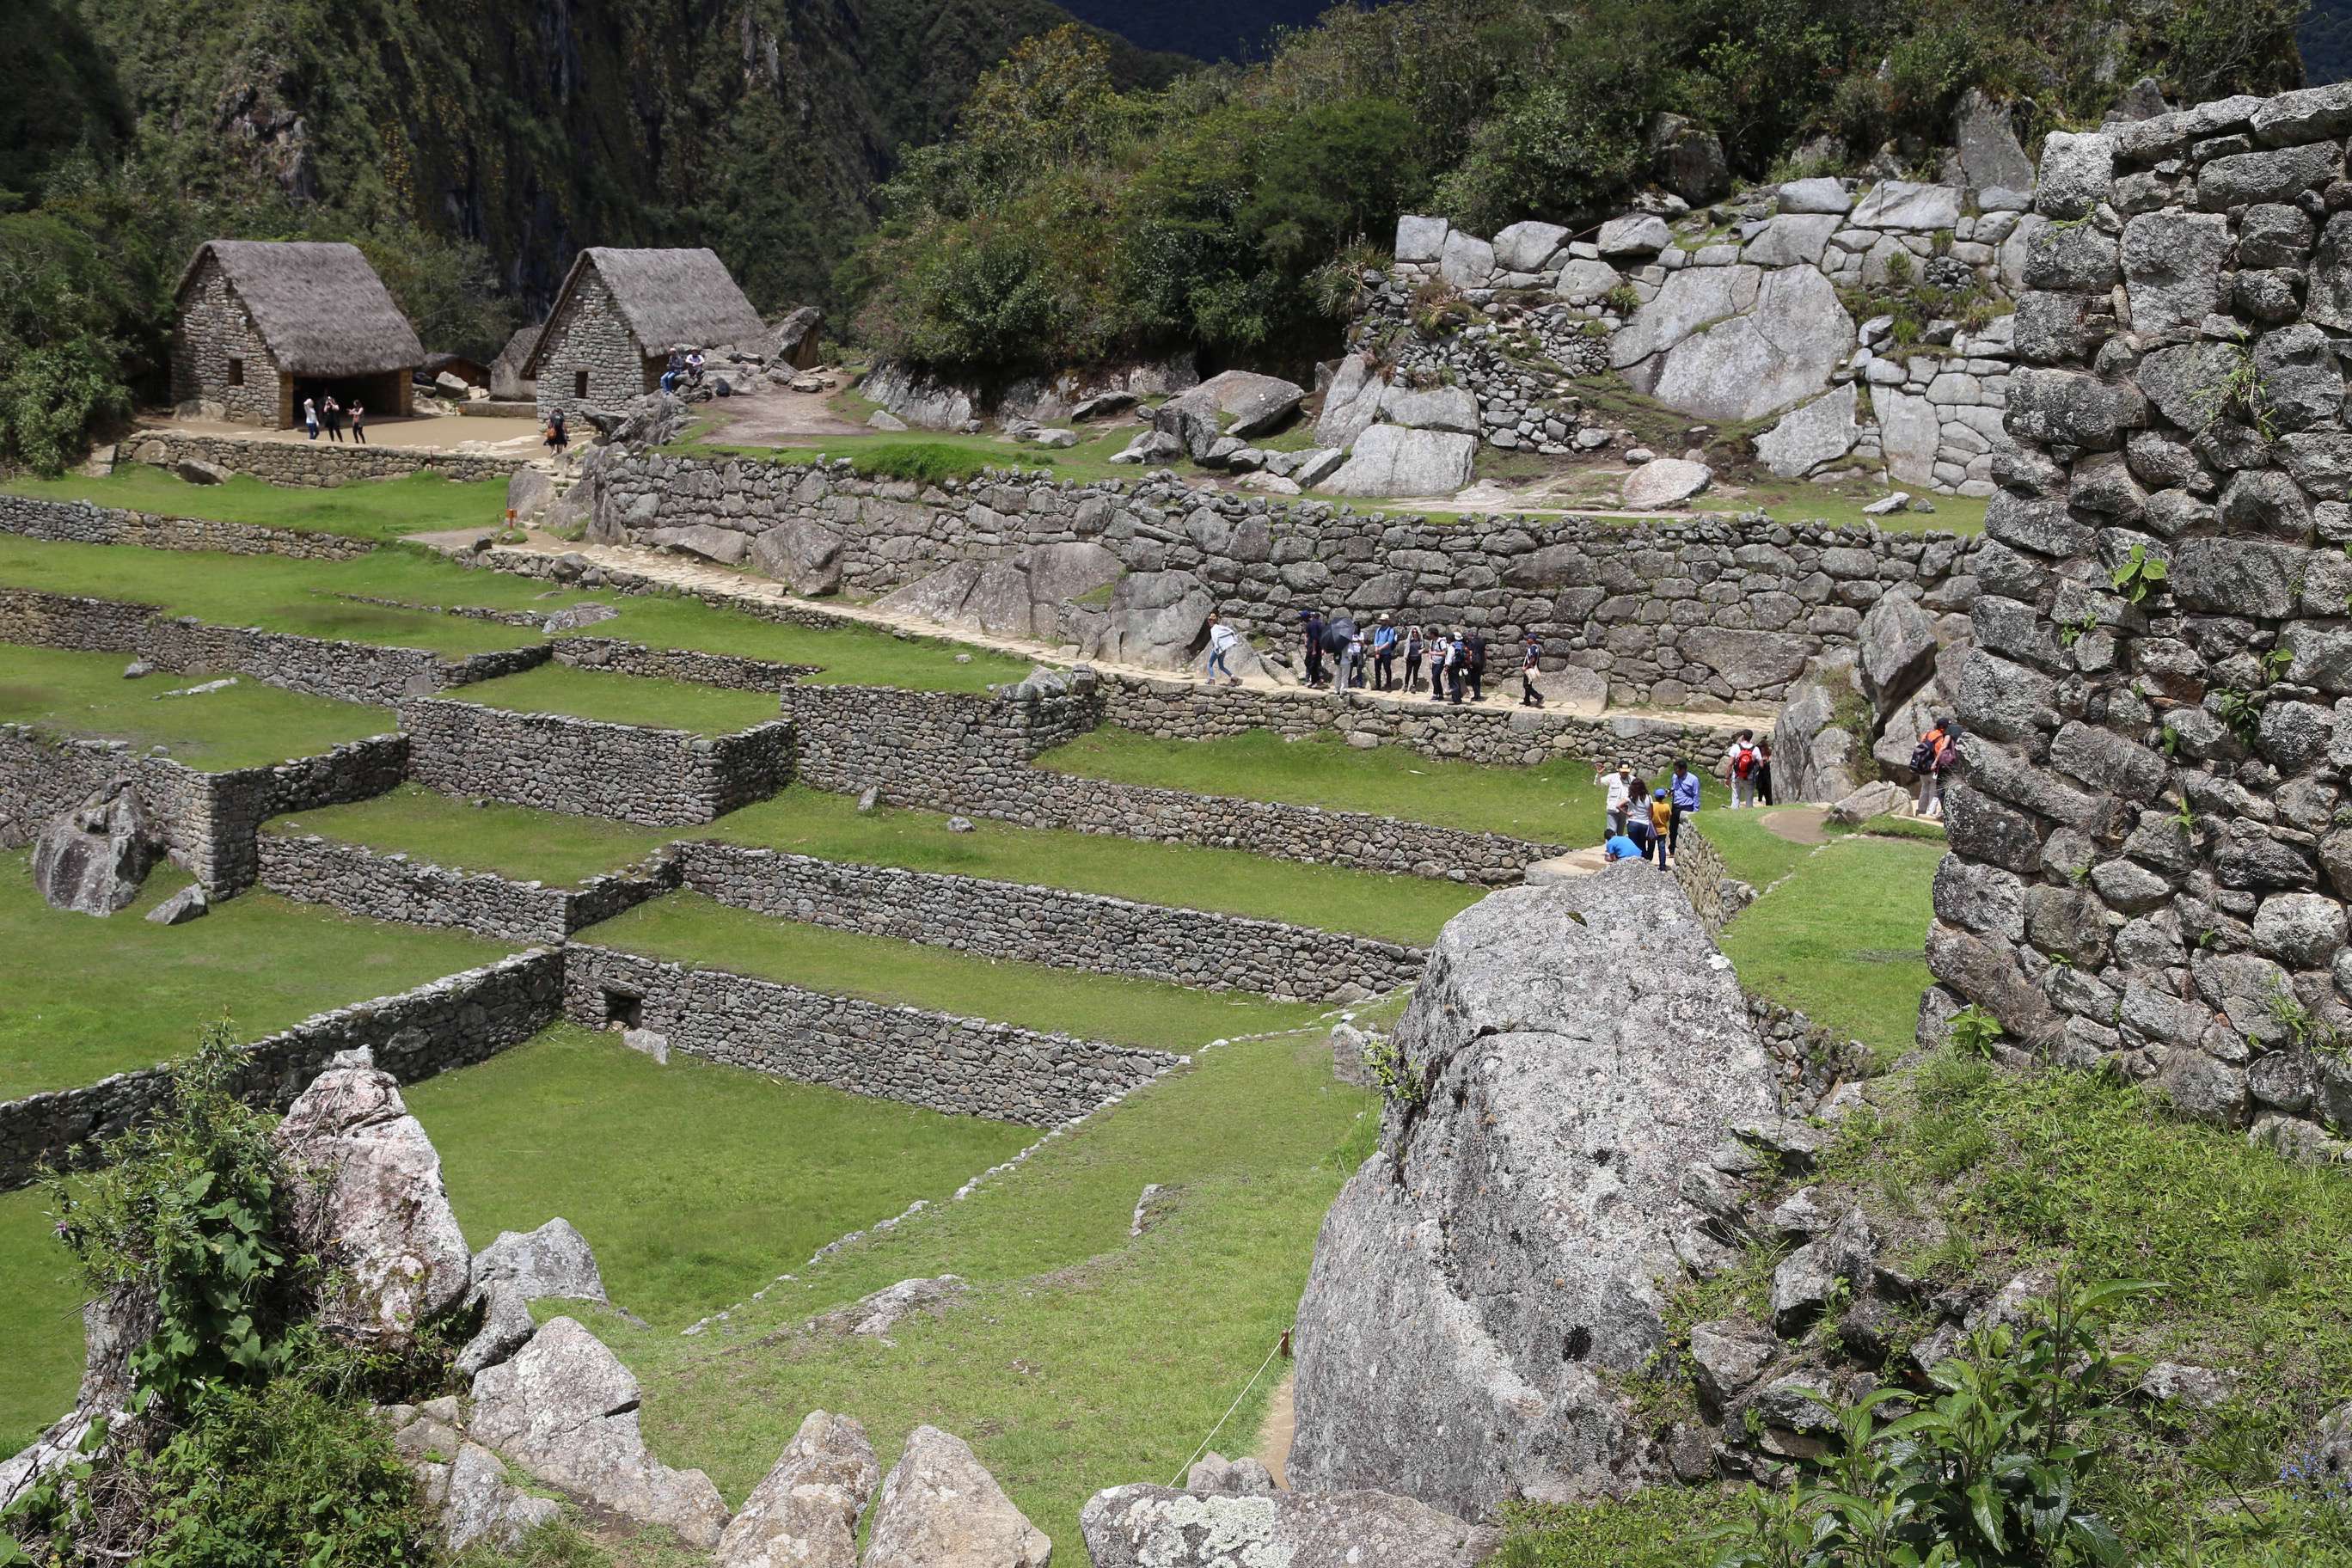 Visitors come from all over the world to see Machu Picchu and appreciate the beauty of the Inca builders.